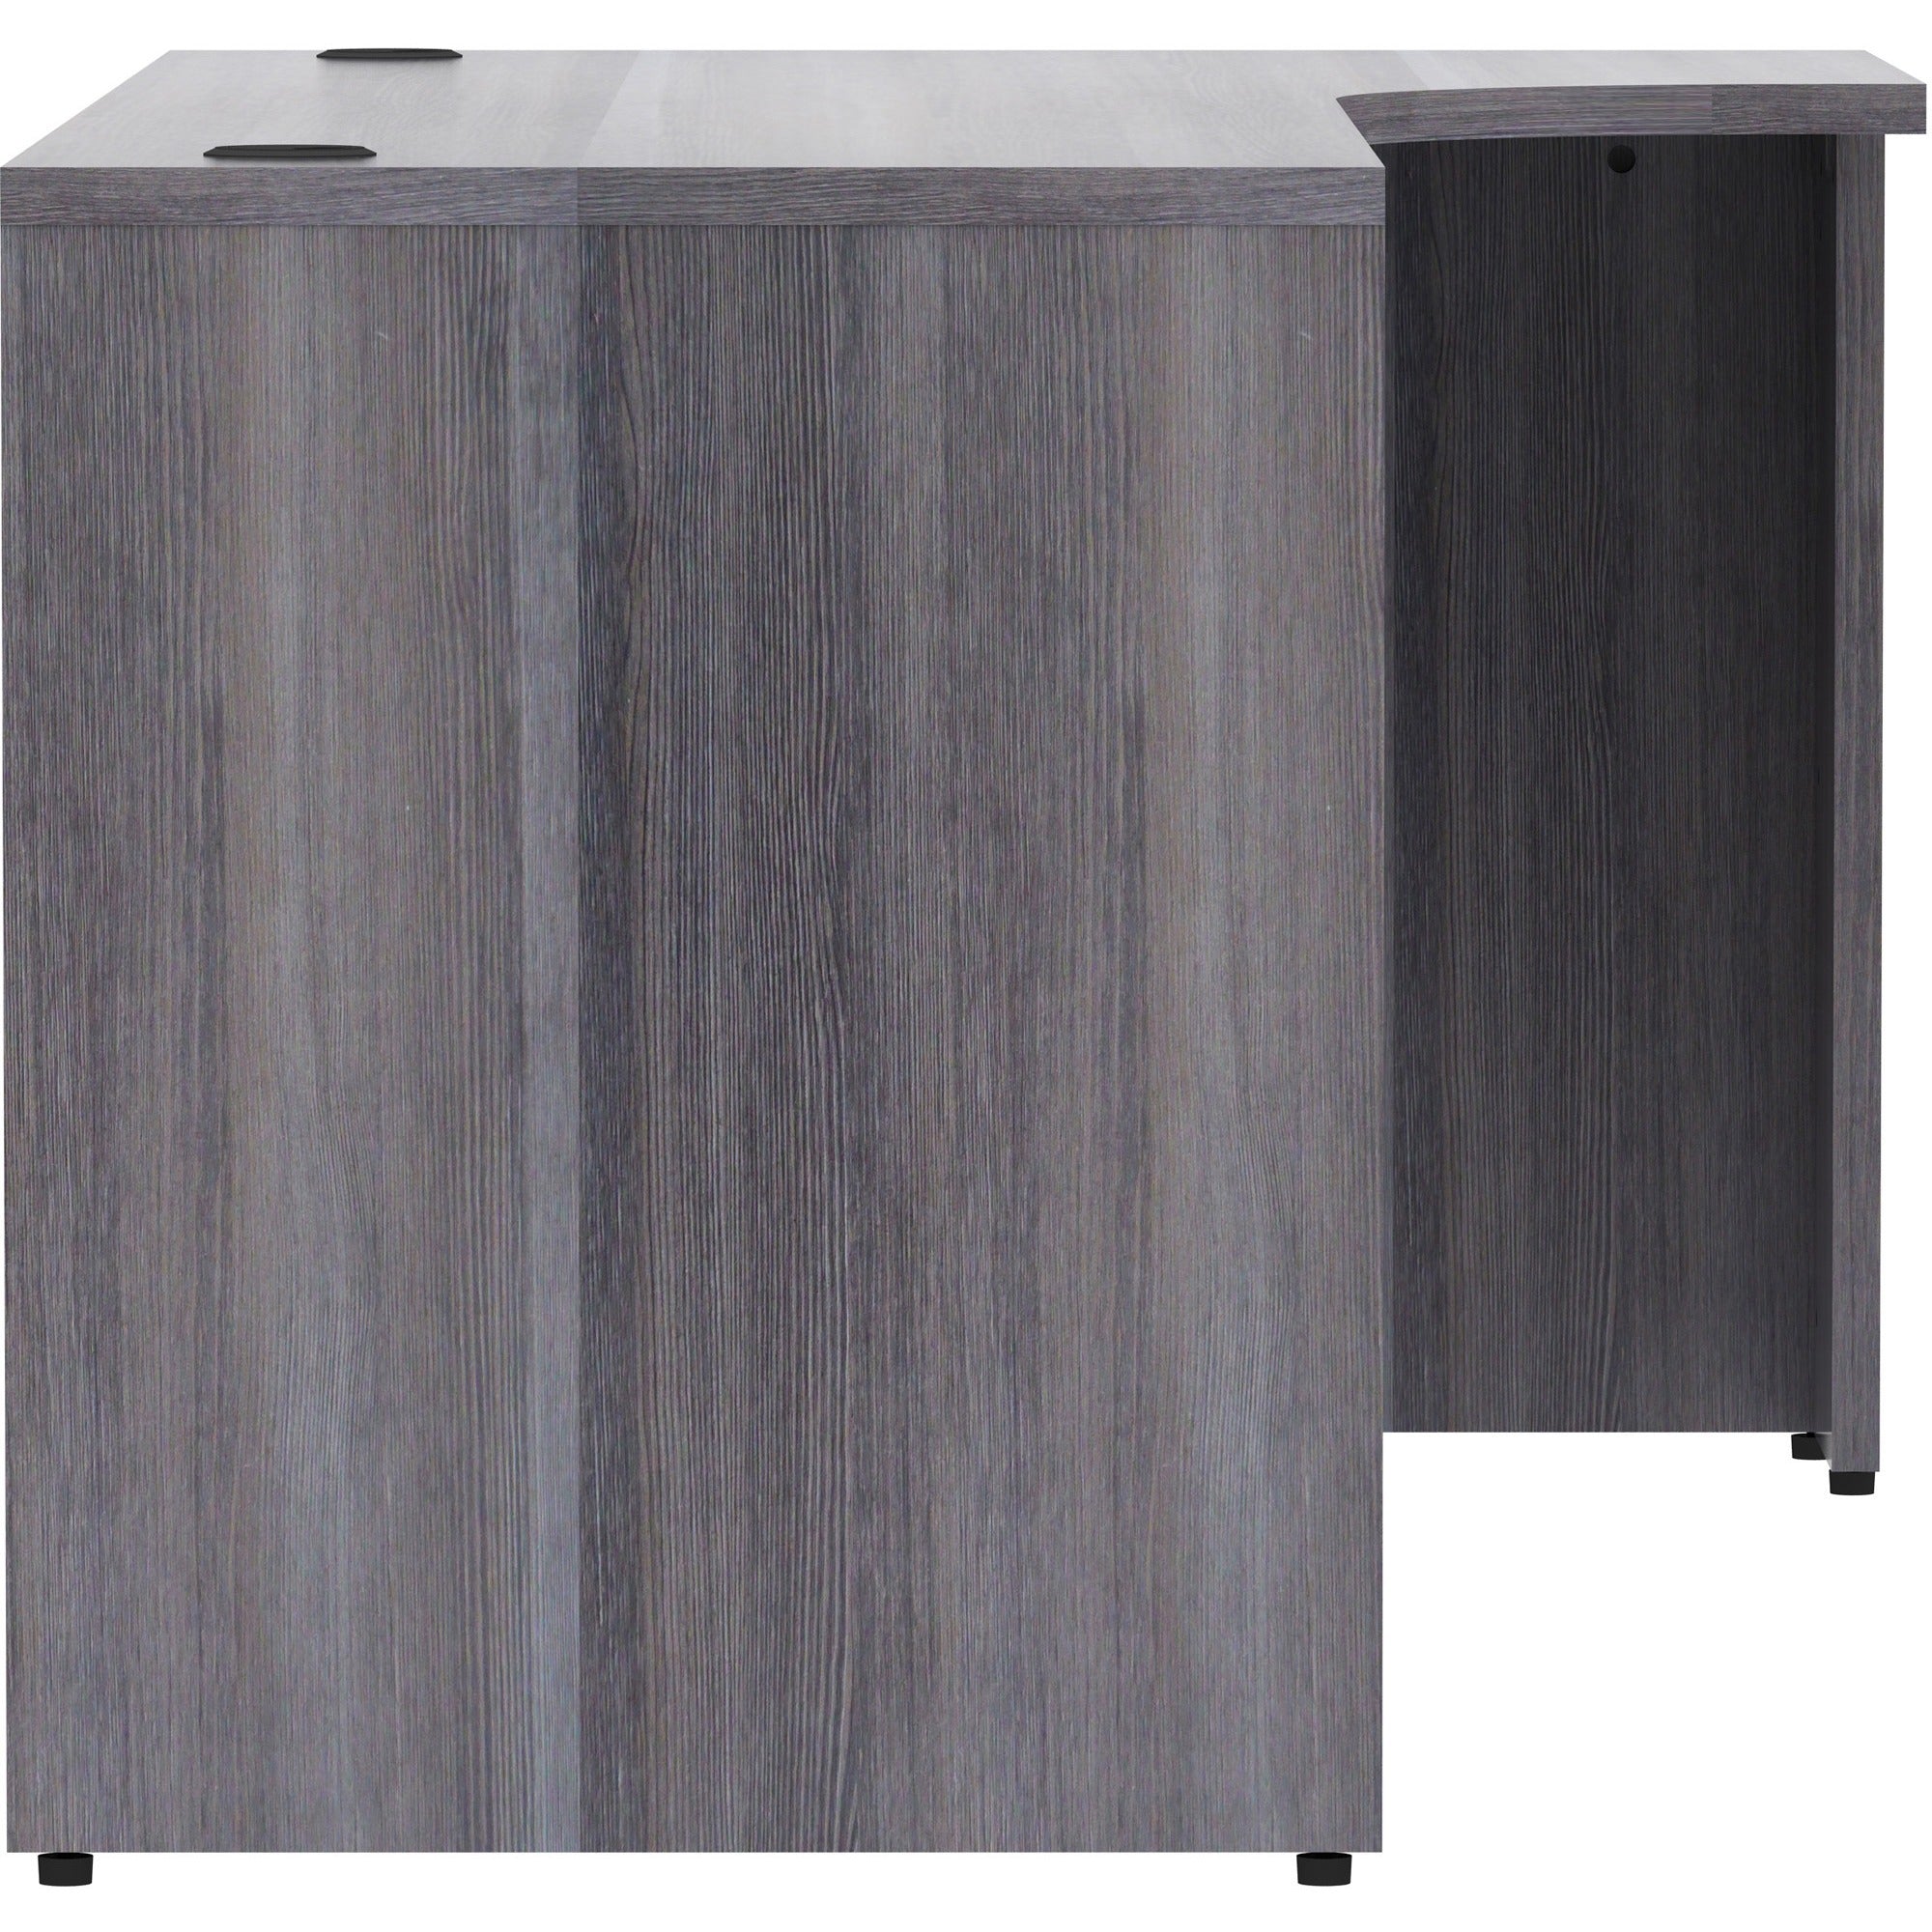 lorell-essentials-seriese-right-corner-credenza-72-x-36-x-24295-credenza-1-top-finish-weathered-charcoal-laminate_llr69599 - 4